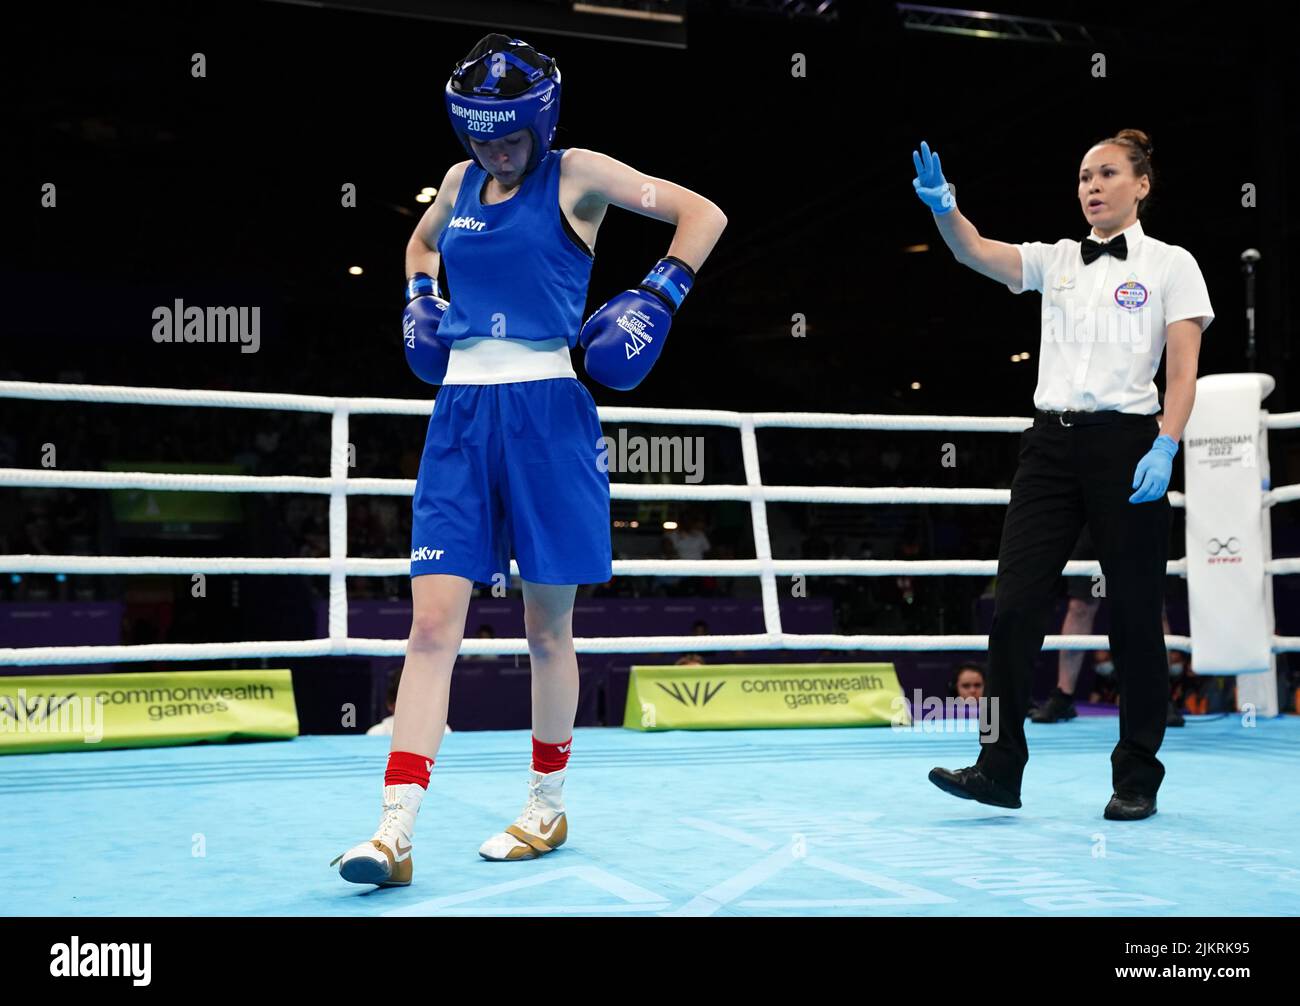 Northern Ireland's Nicole Clyde is docked points on her way to defeat in her bout against India's Nitu Nitu during the Women's Over 45kg-48kg Quarter Final 2 at The NEC on day six of the 2022 Commonwealth Games in Birmingham. Picture date: Wednesday August 3, 2022. Stock Photo